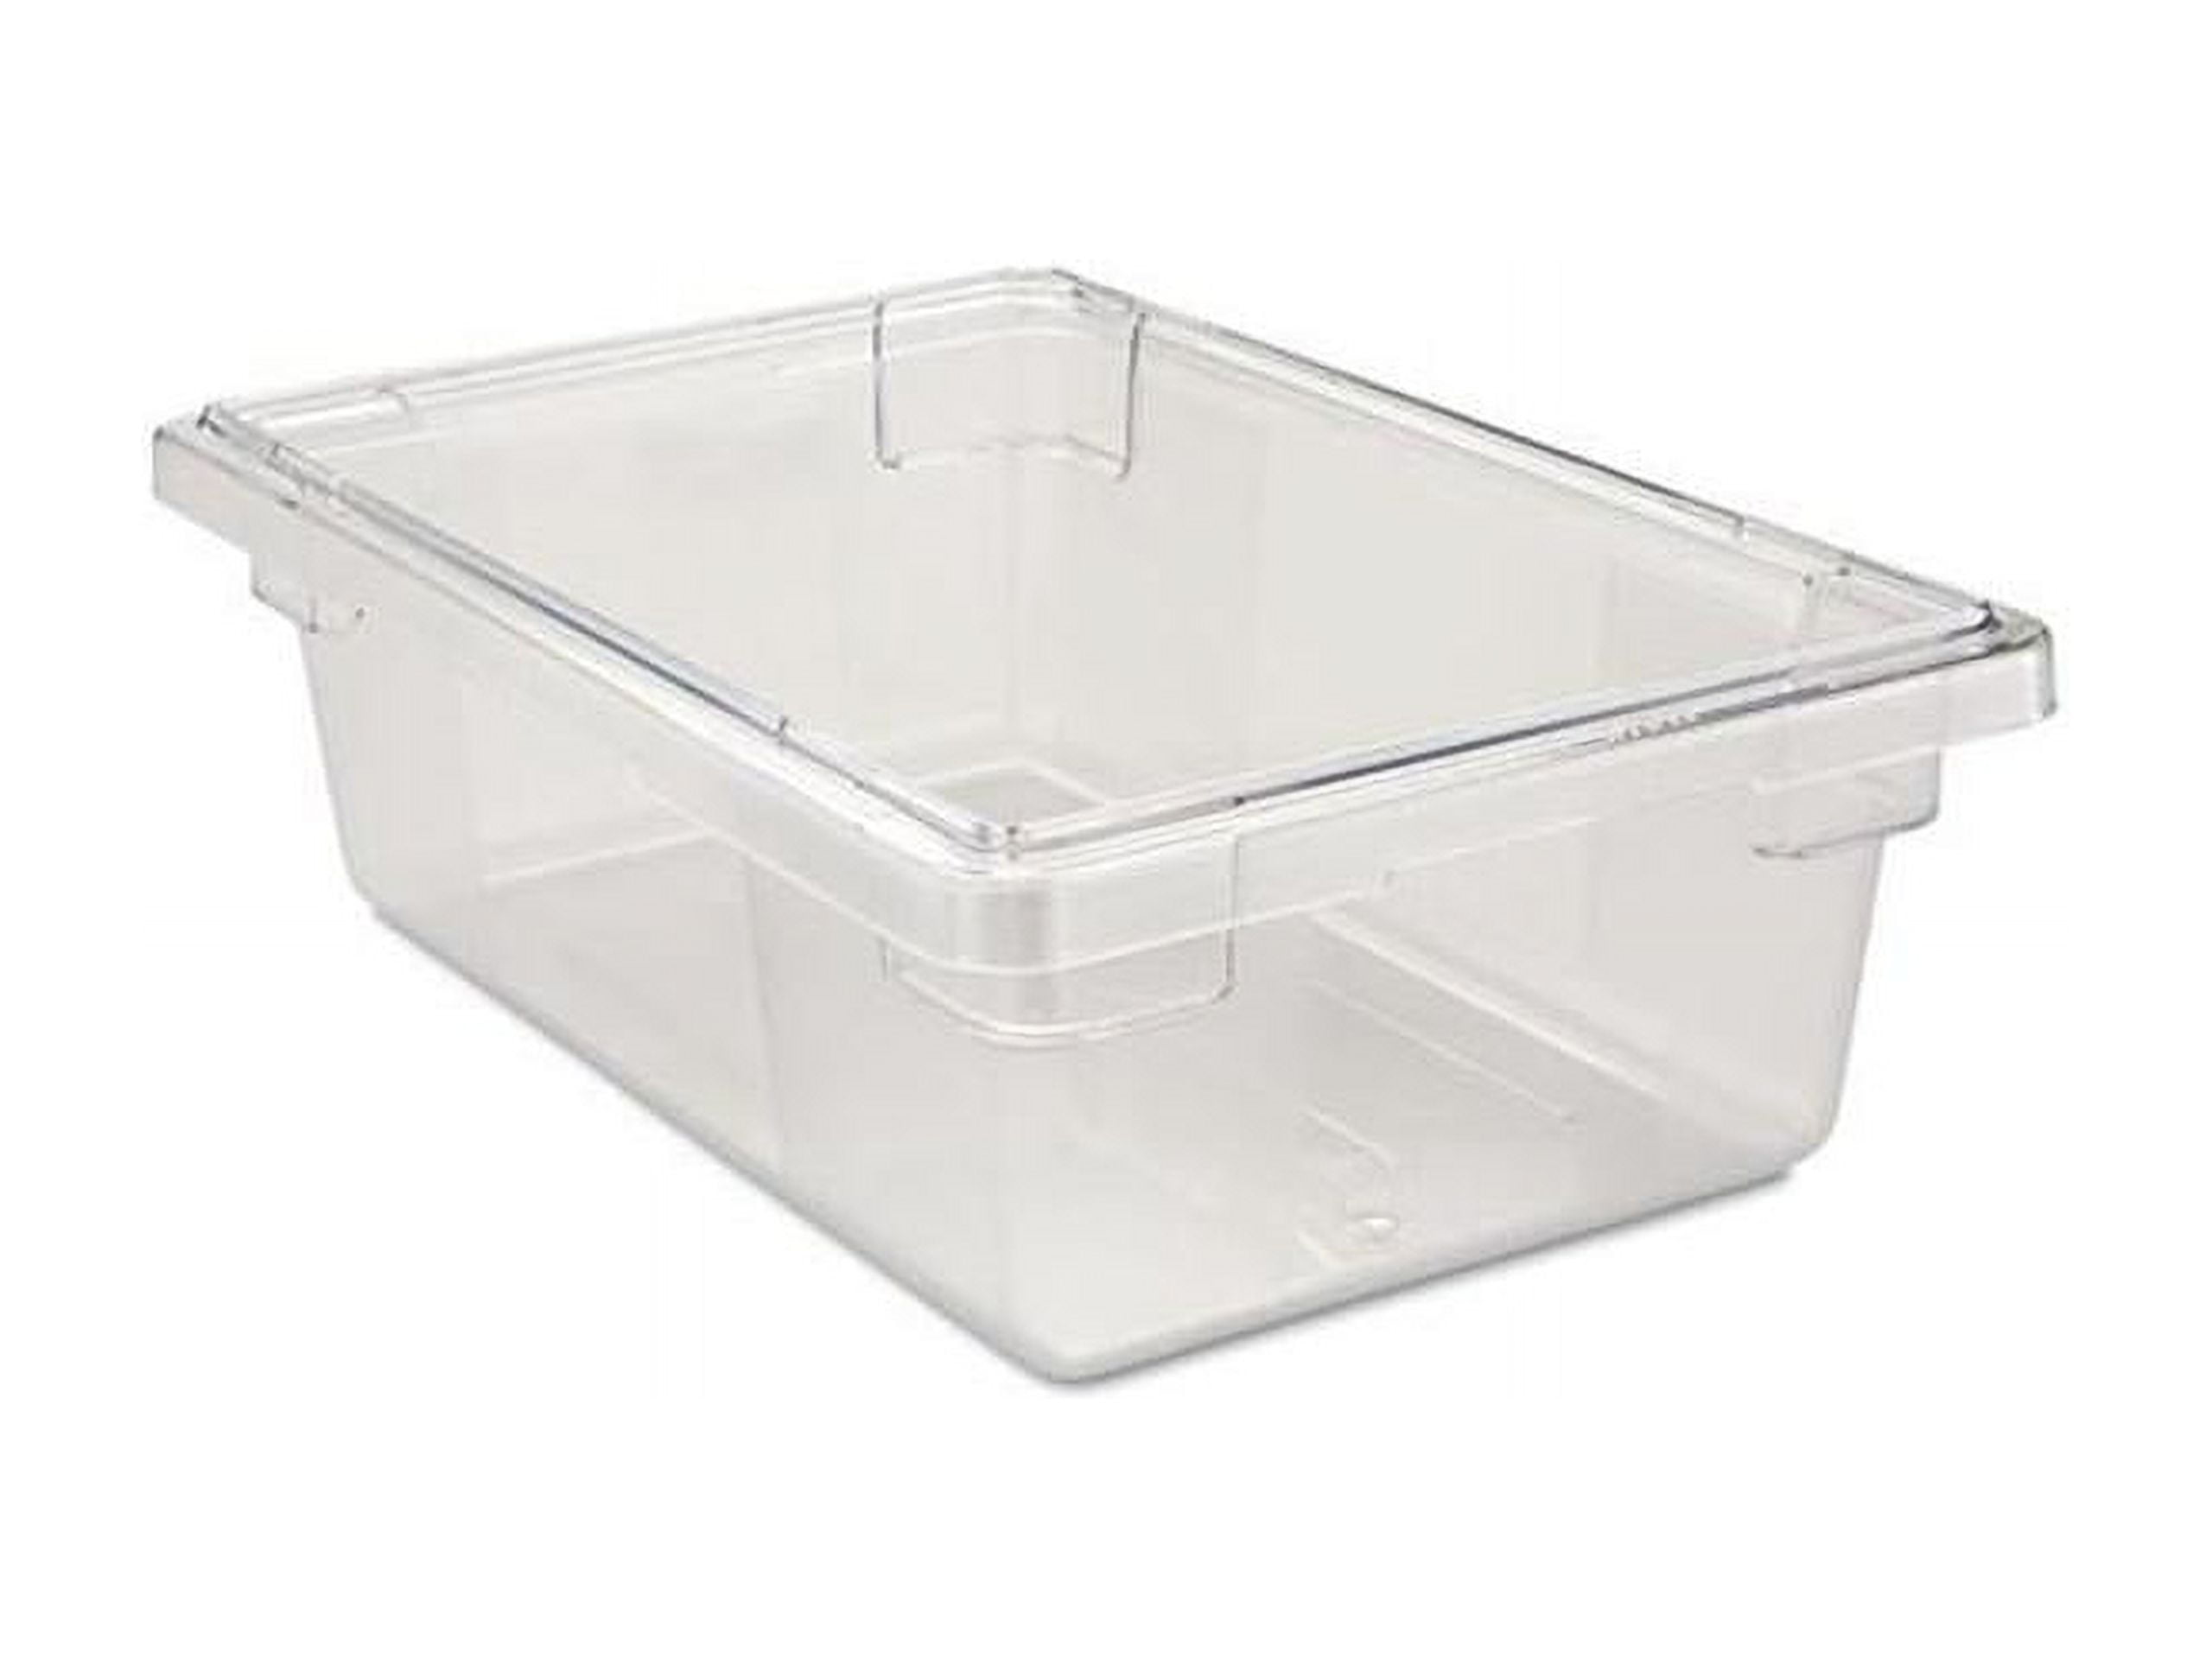 Rubbermaid Commercial Products Large Shallow Food Storage Container for  Kitchen Restaurant Use, 5 Gallon Clear, 26 x 18 x 3.5 inches